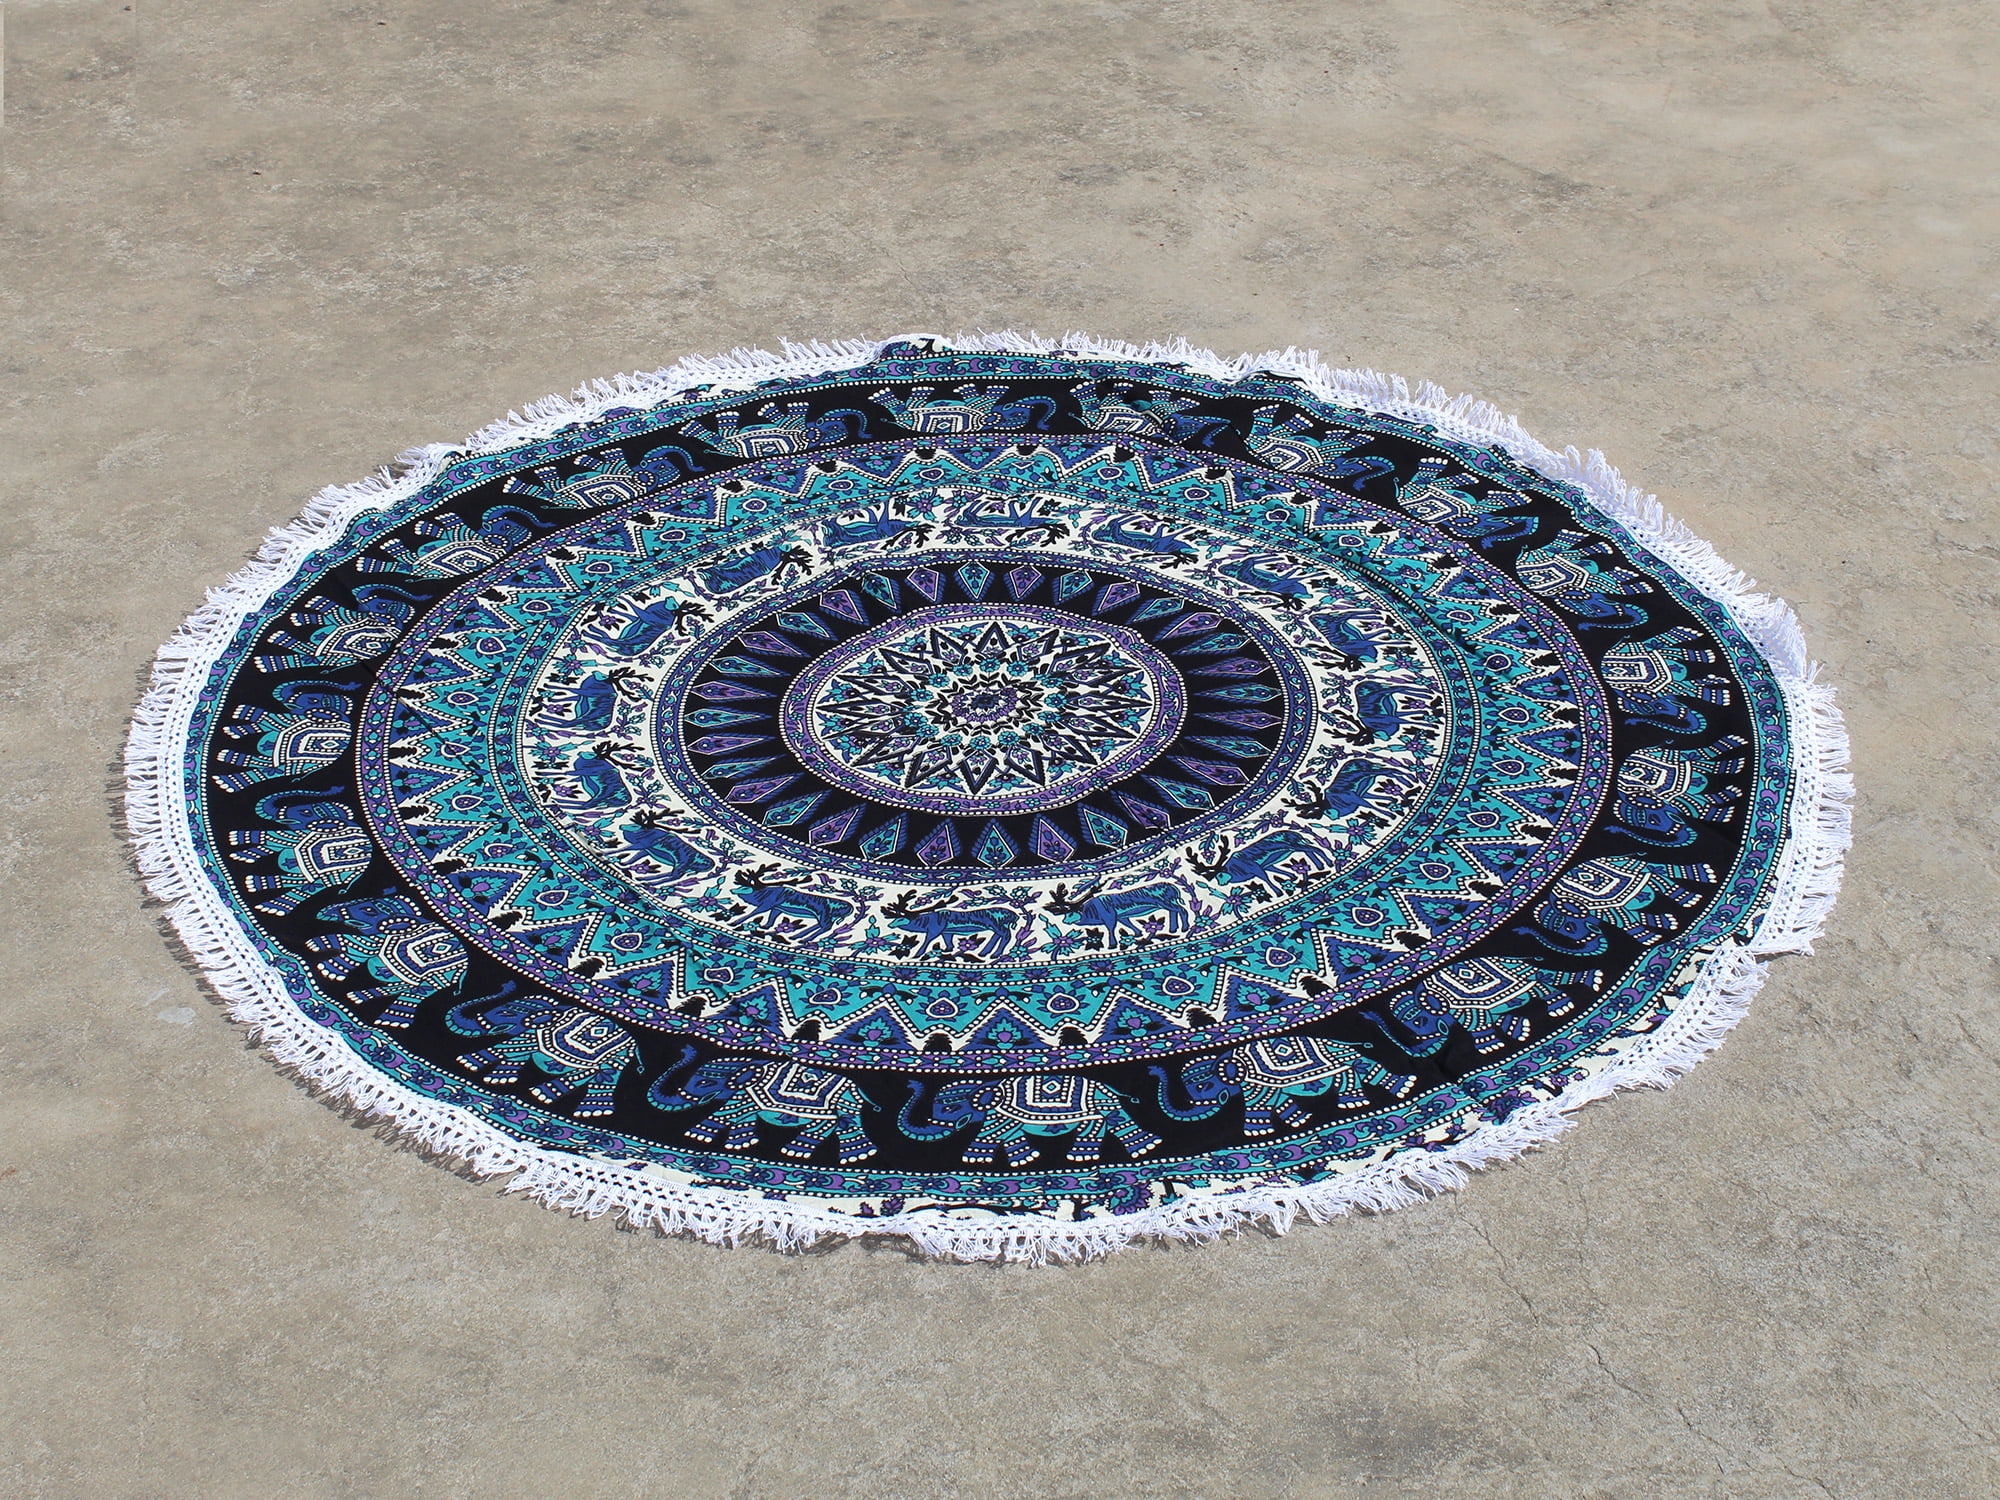 Indian Cotton Poster Mandala Yoga Mat Tapestry Ethnic Wall Table Cover Decor Art 